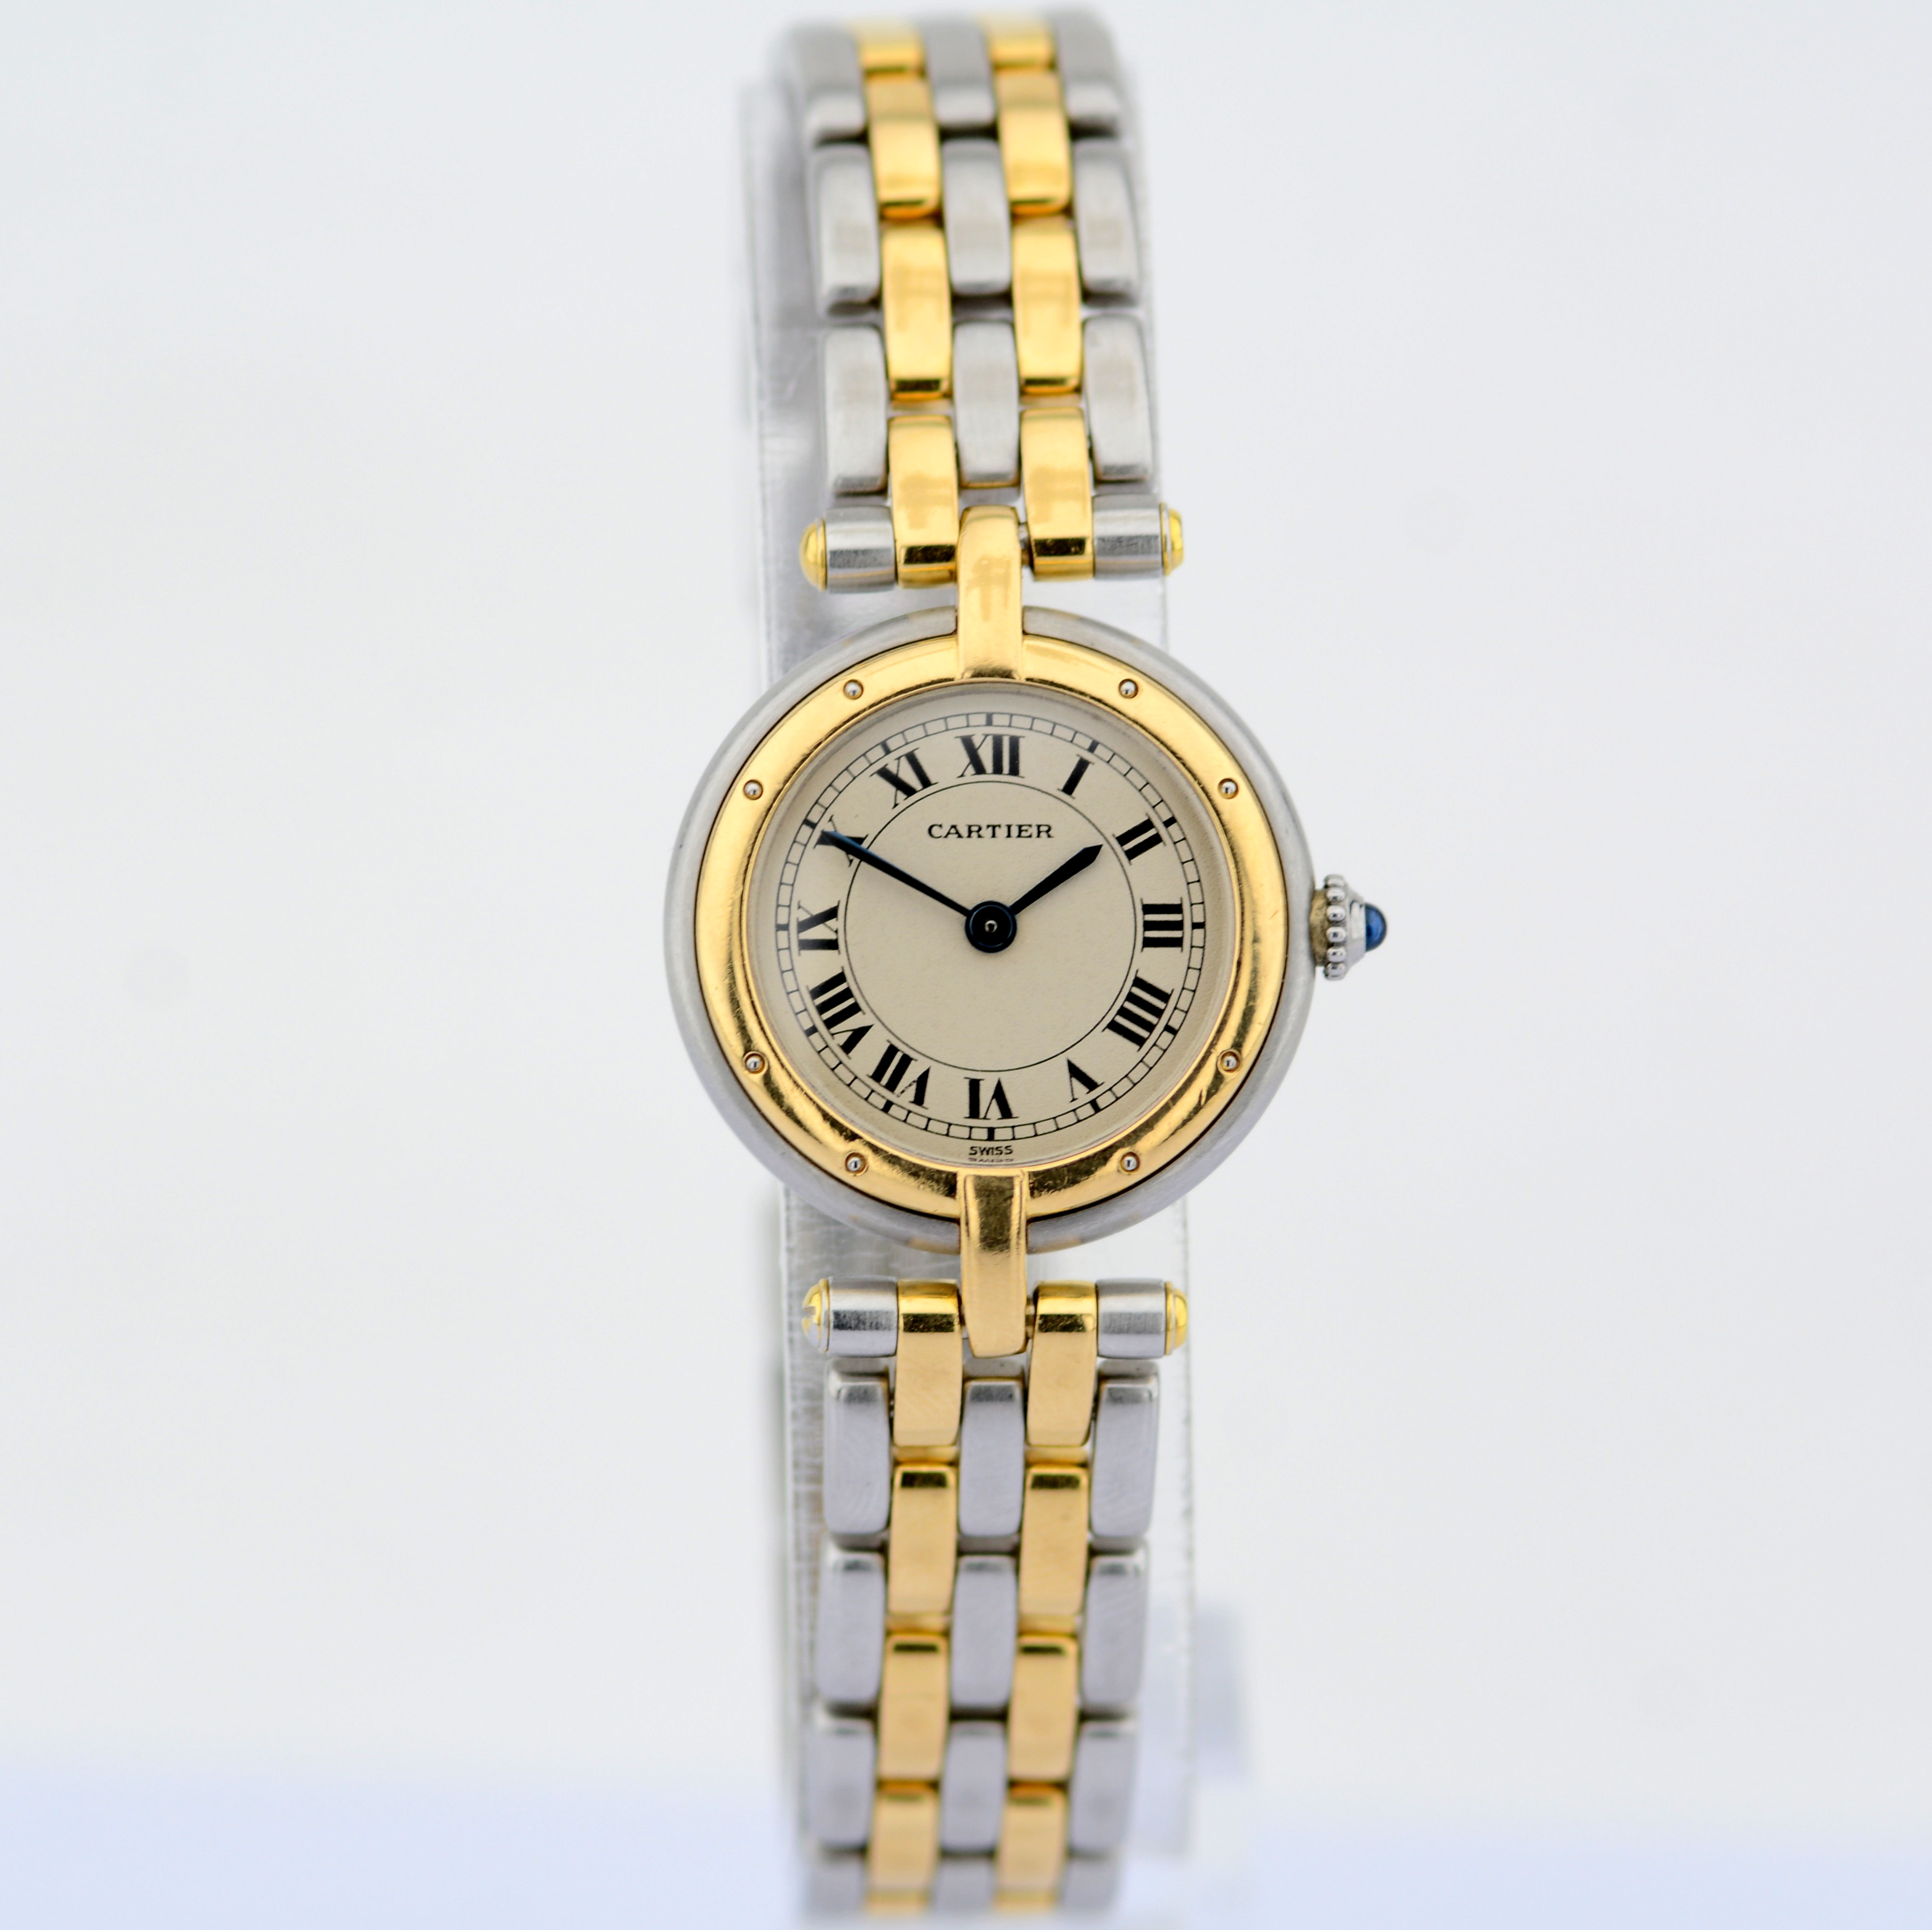 Cartier / Cartier Panthere Vendome 18K double row gold bracelet - Lady's Gold/Steel Wrist Watch - Image 4 of 10